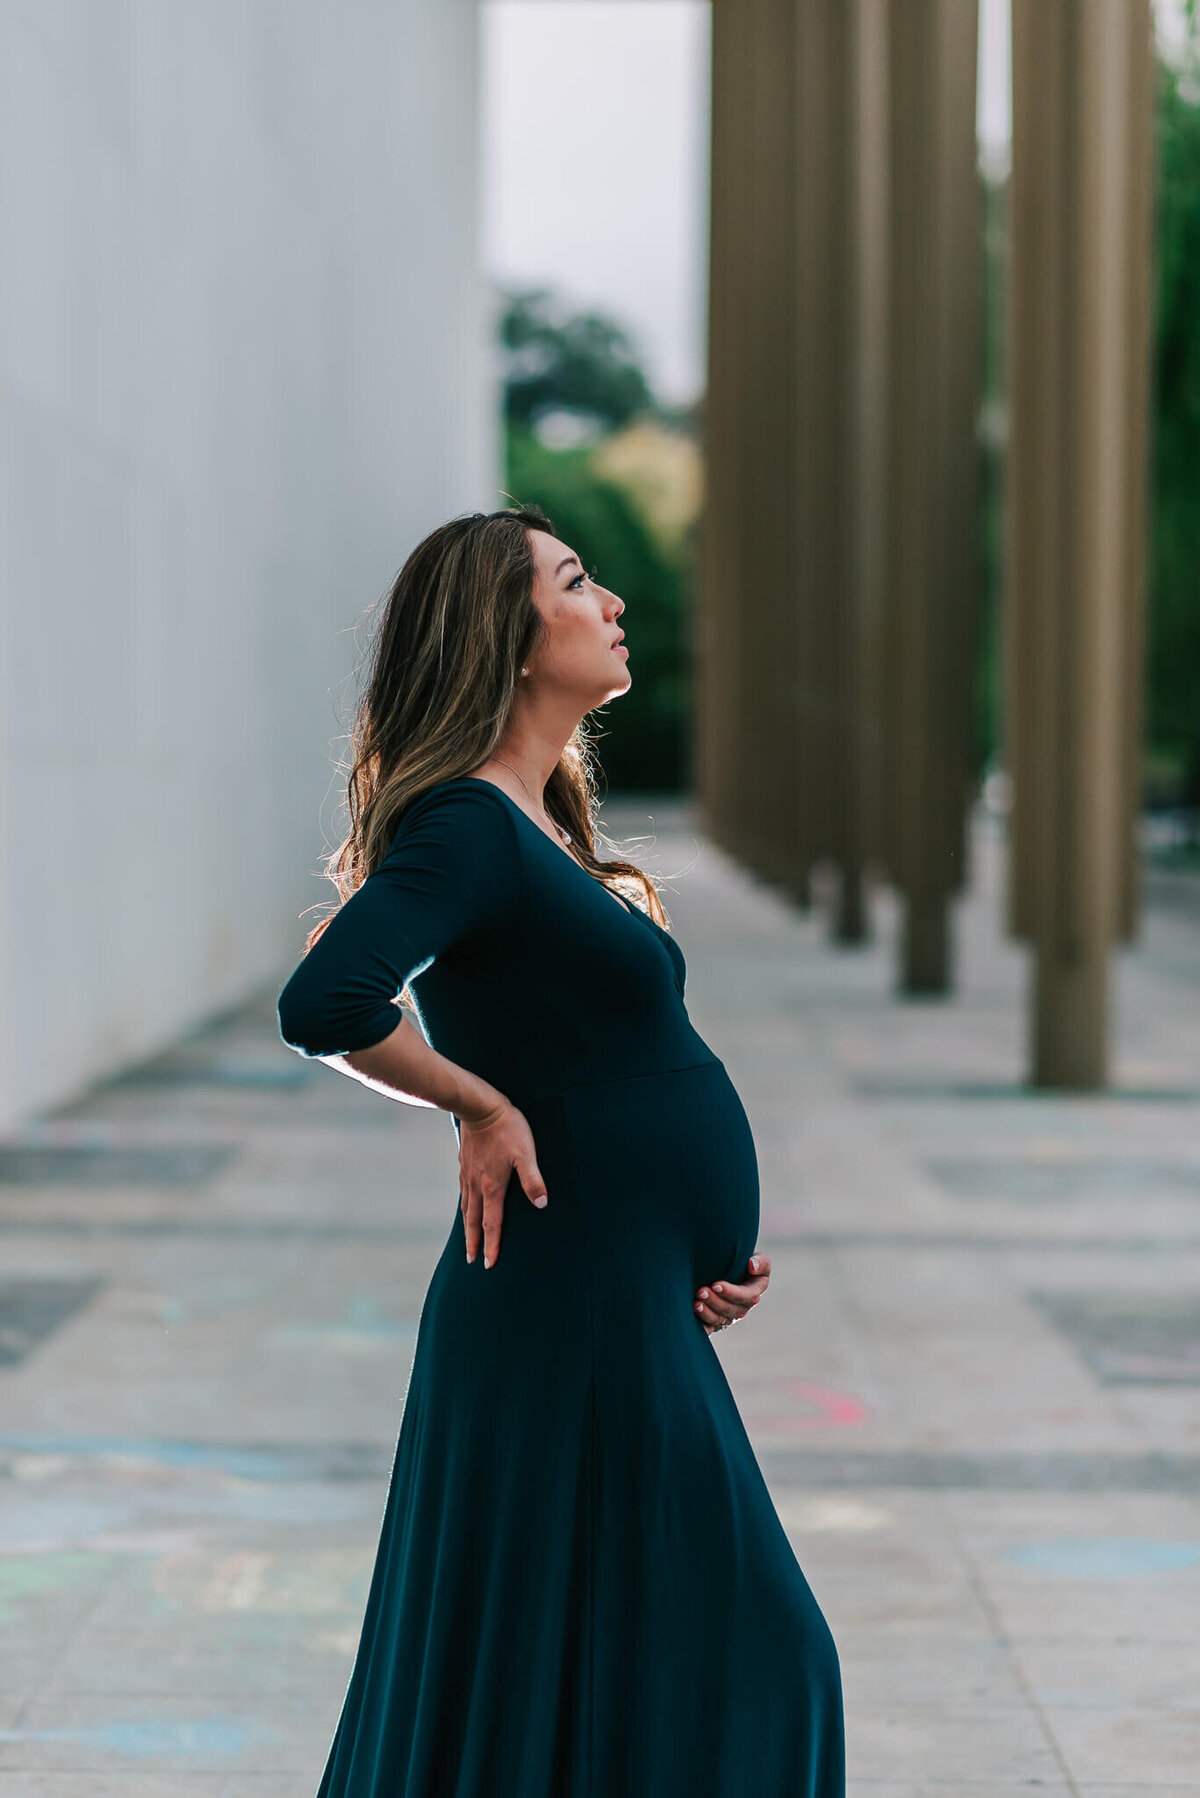 A stunning mother during her maternity session by a northern virginia maternity photographer, Denise Van